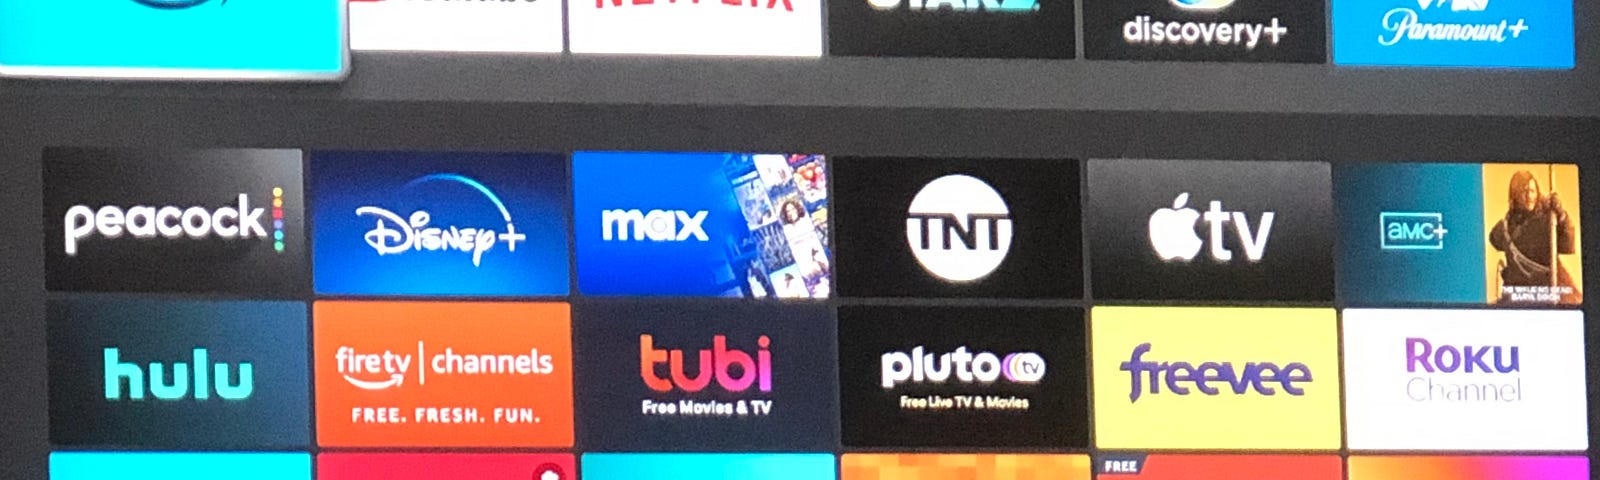 Image of different TV apps grouped together.